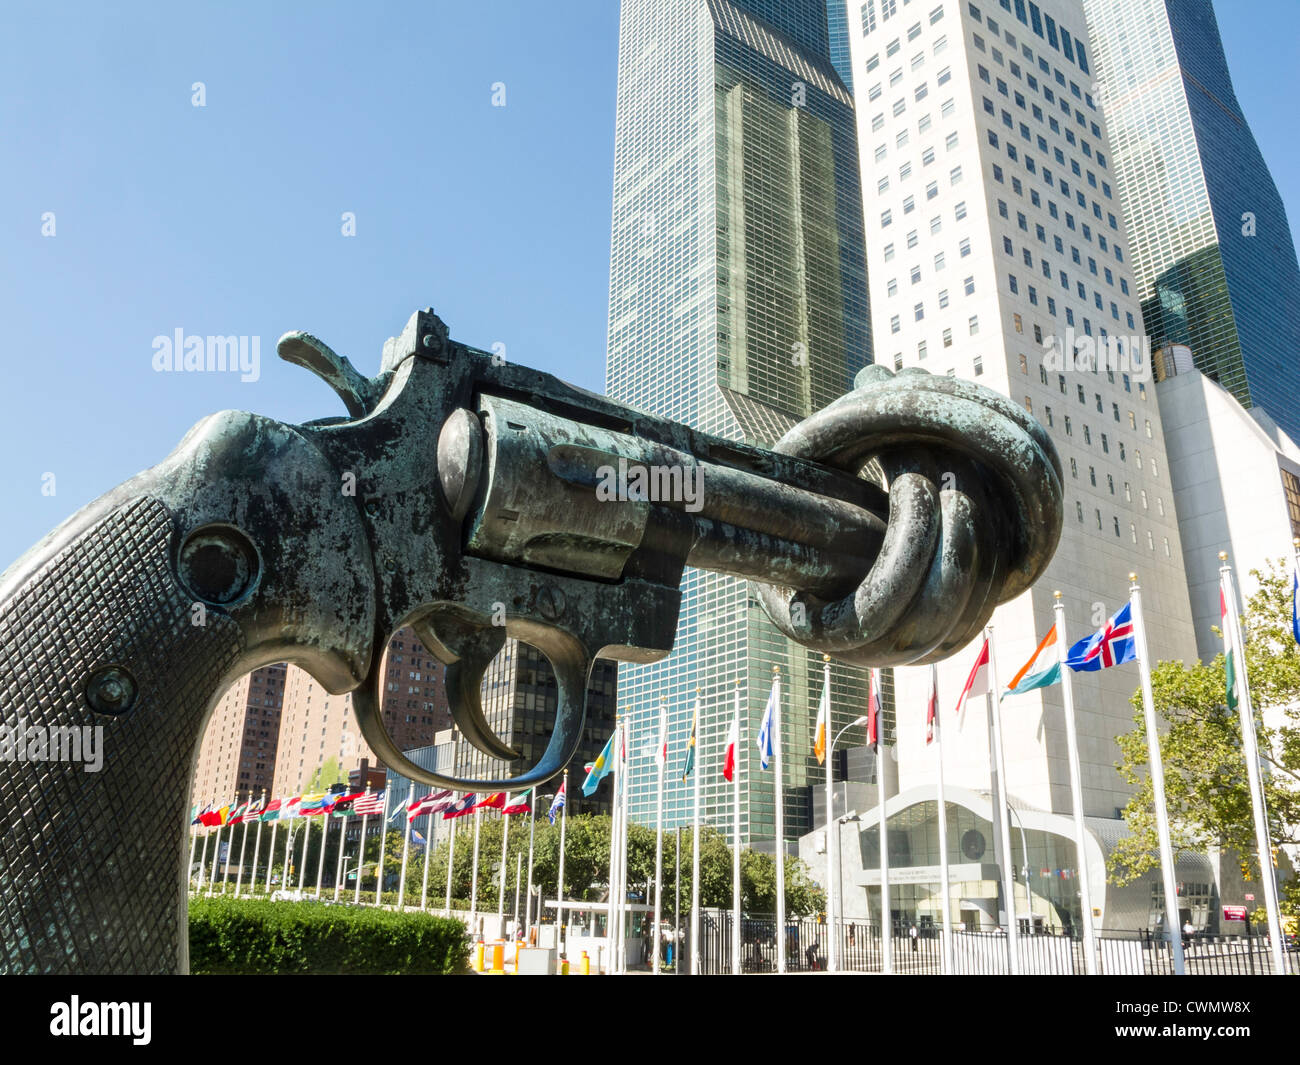 Knotted Gun, called Non-Violence Sculpture, United Nations Headquarters, NYC Stock Photo